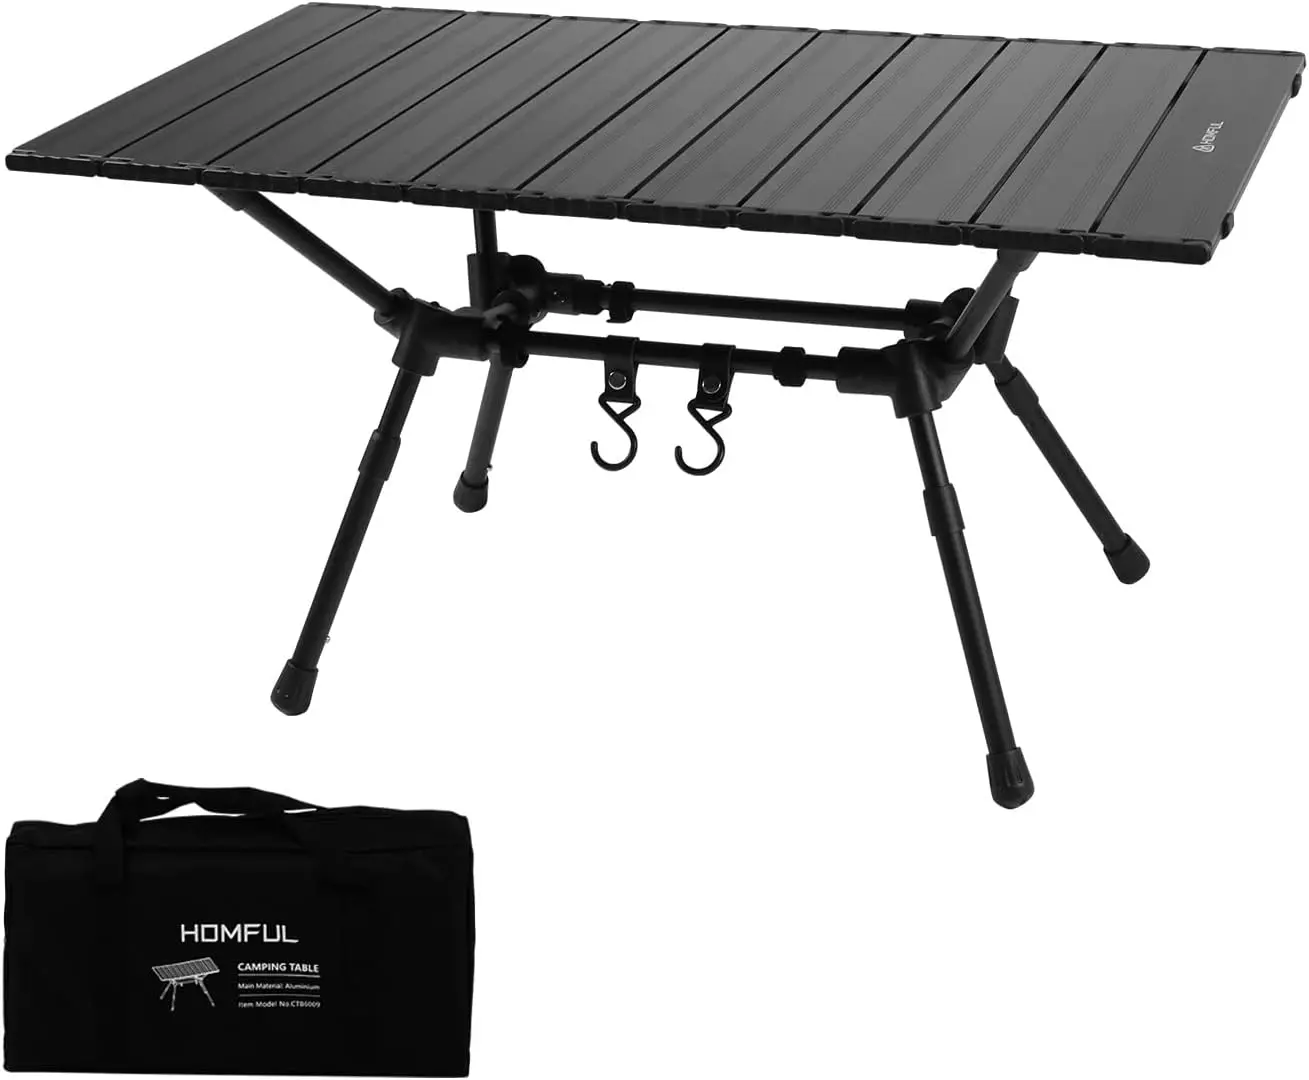 

Camping Tables with Aluminum Table Top Ultralight Camp Table with Carry Bag for Indoor, Outdoor, Backpacking